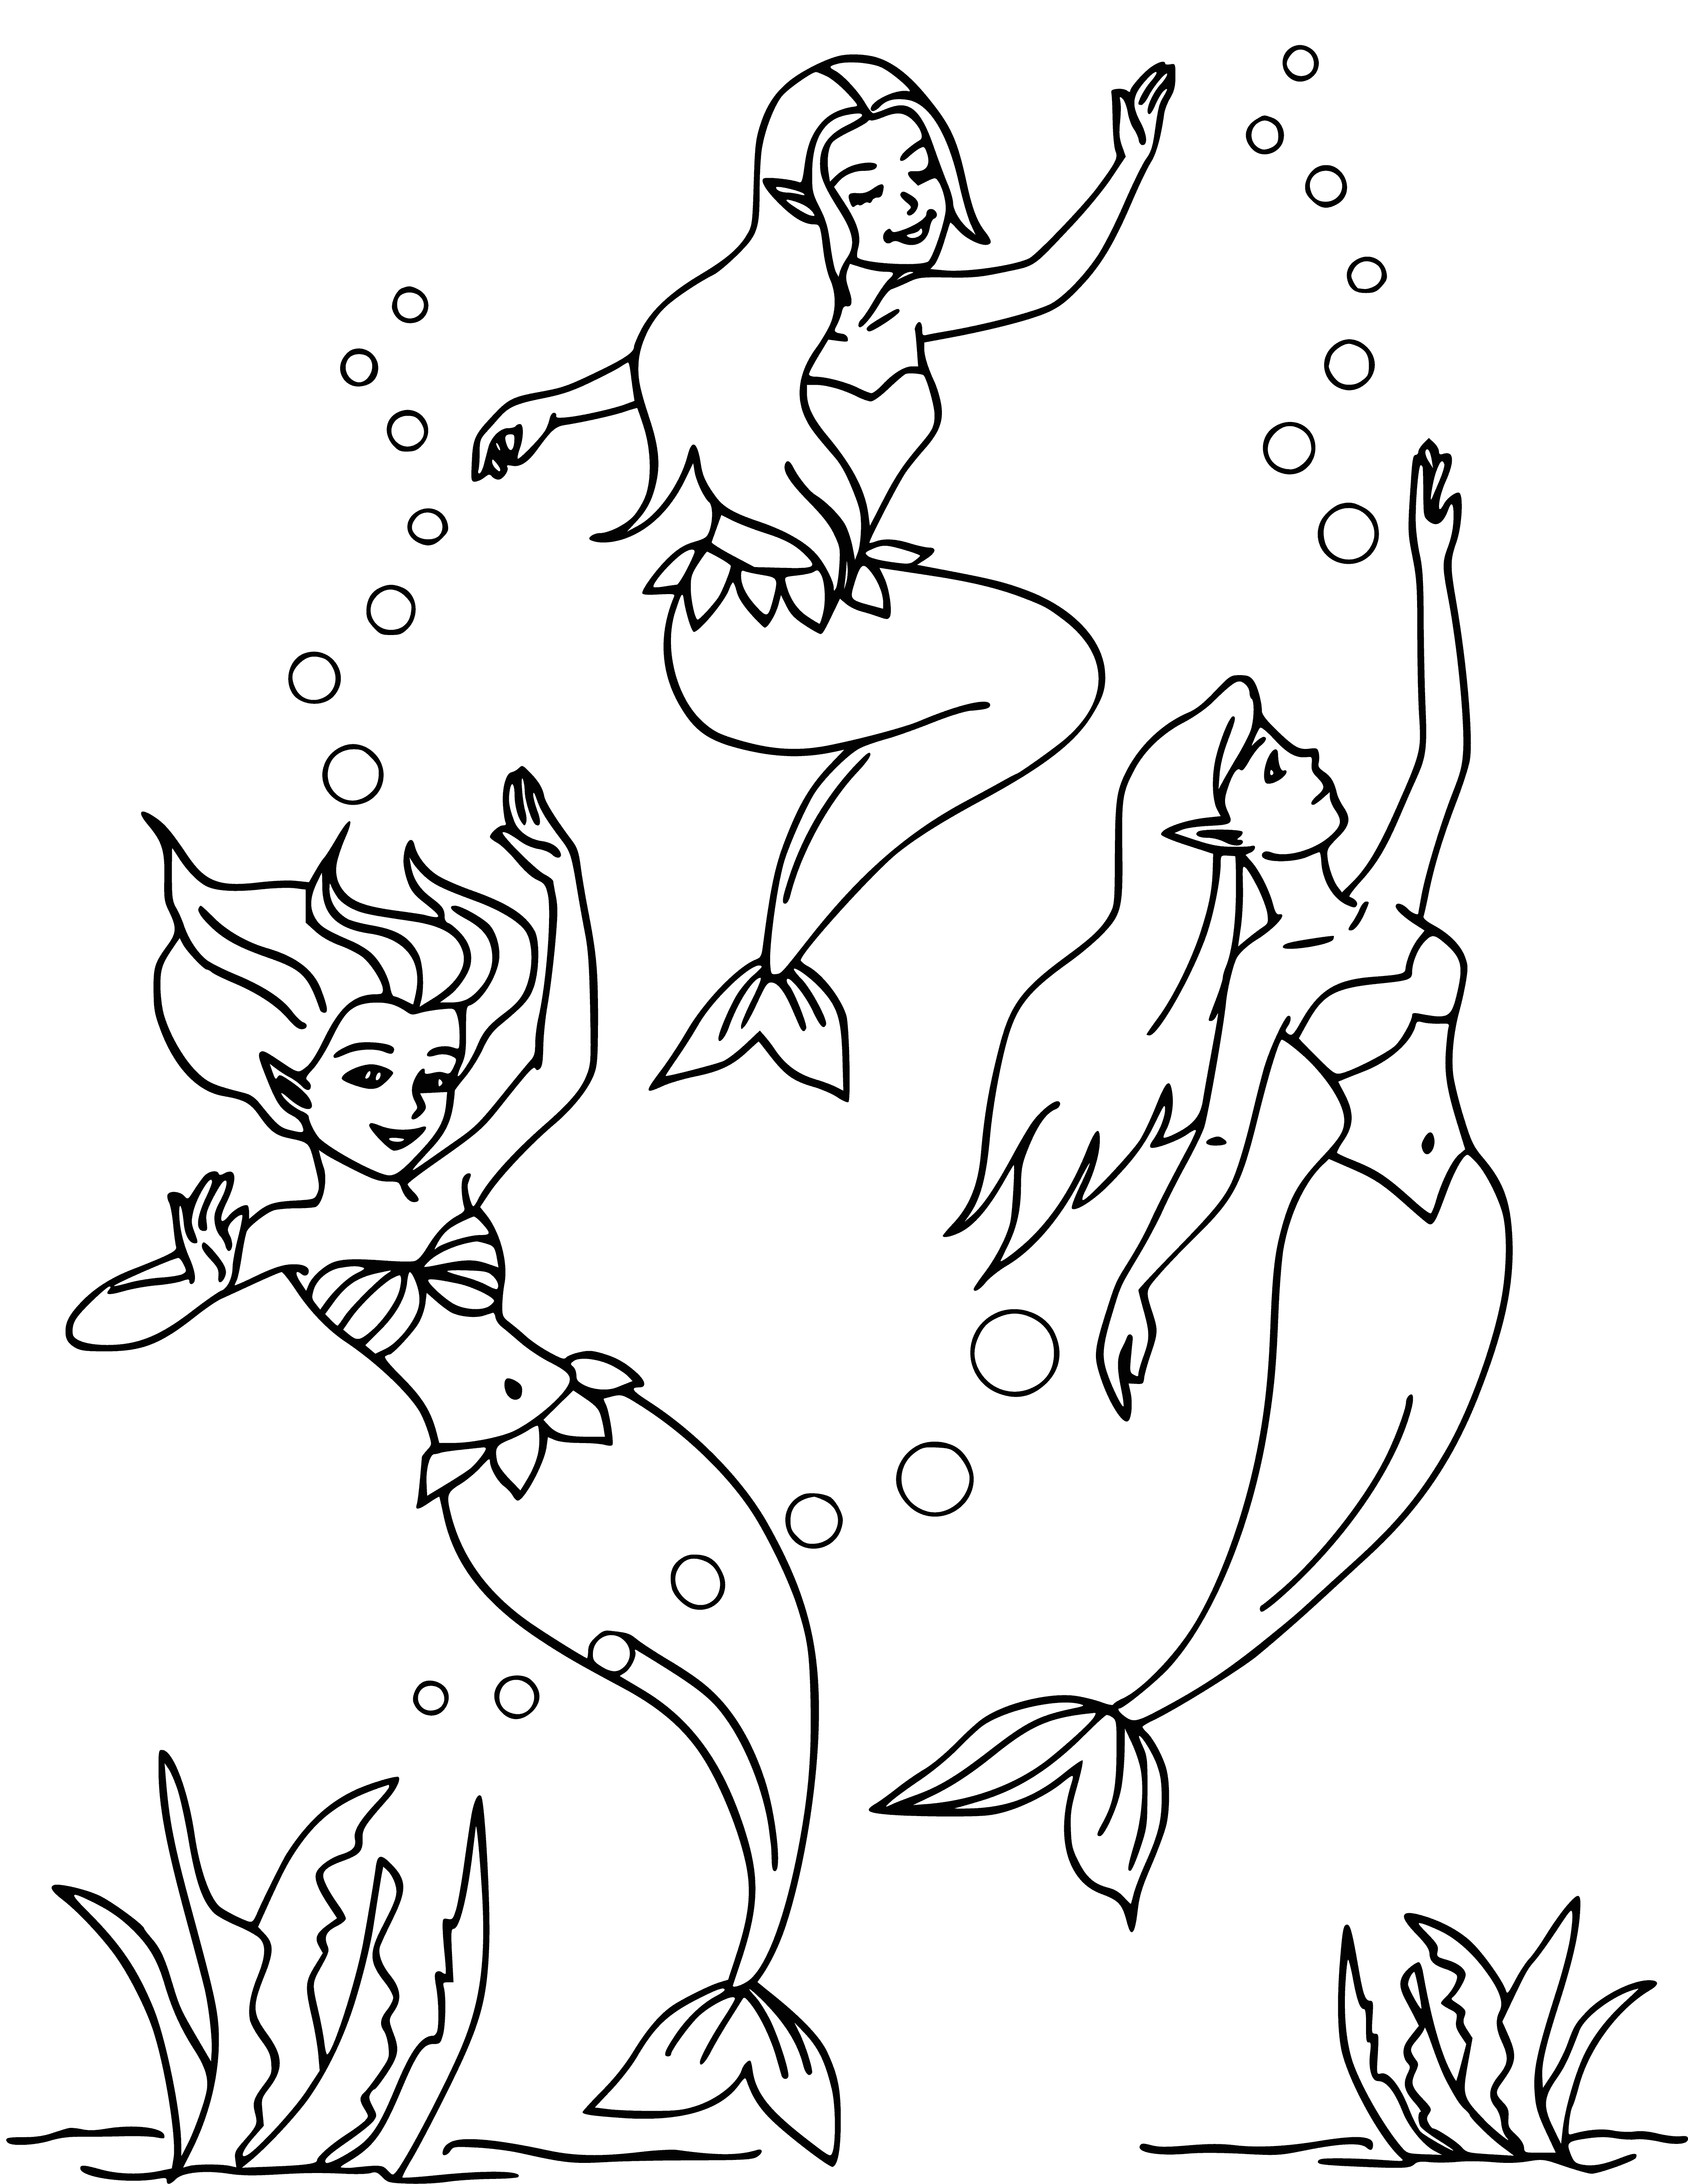 Sirens coloring page